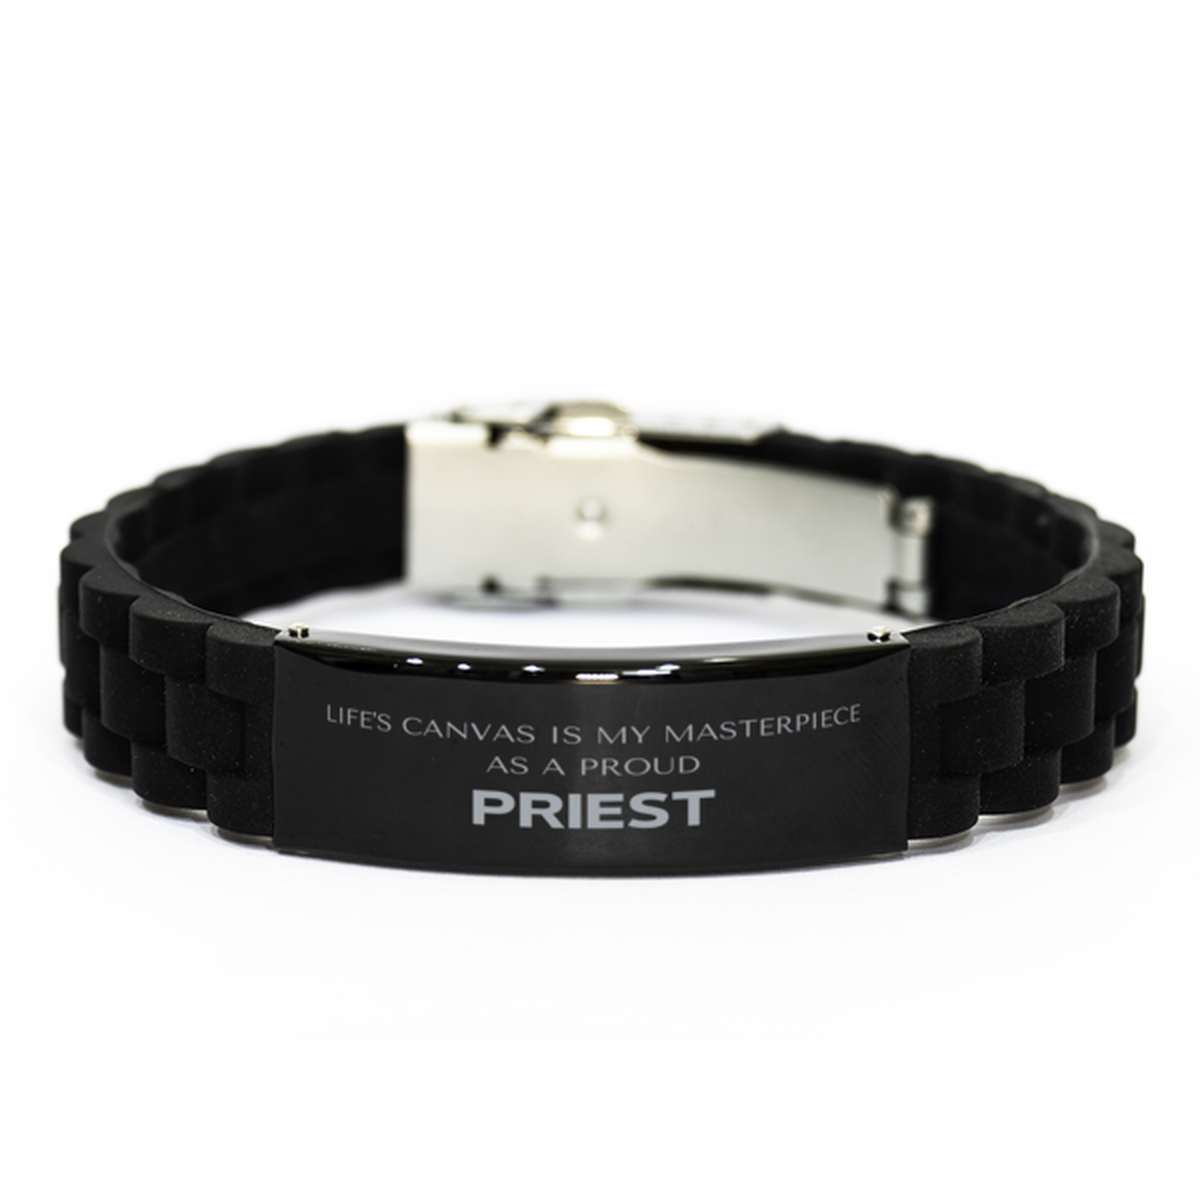 Proud Priest Gifts, Life's canvas is my masterpiece, Epic Birthday Christmas Unique Black Glidelock Clasp Bracelet For Priest, Coworkers, Men, Women, Friends